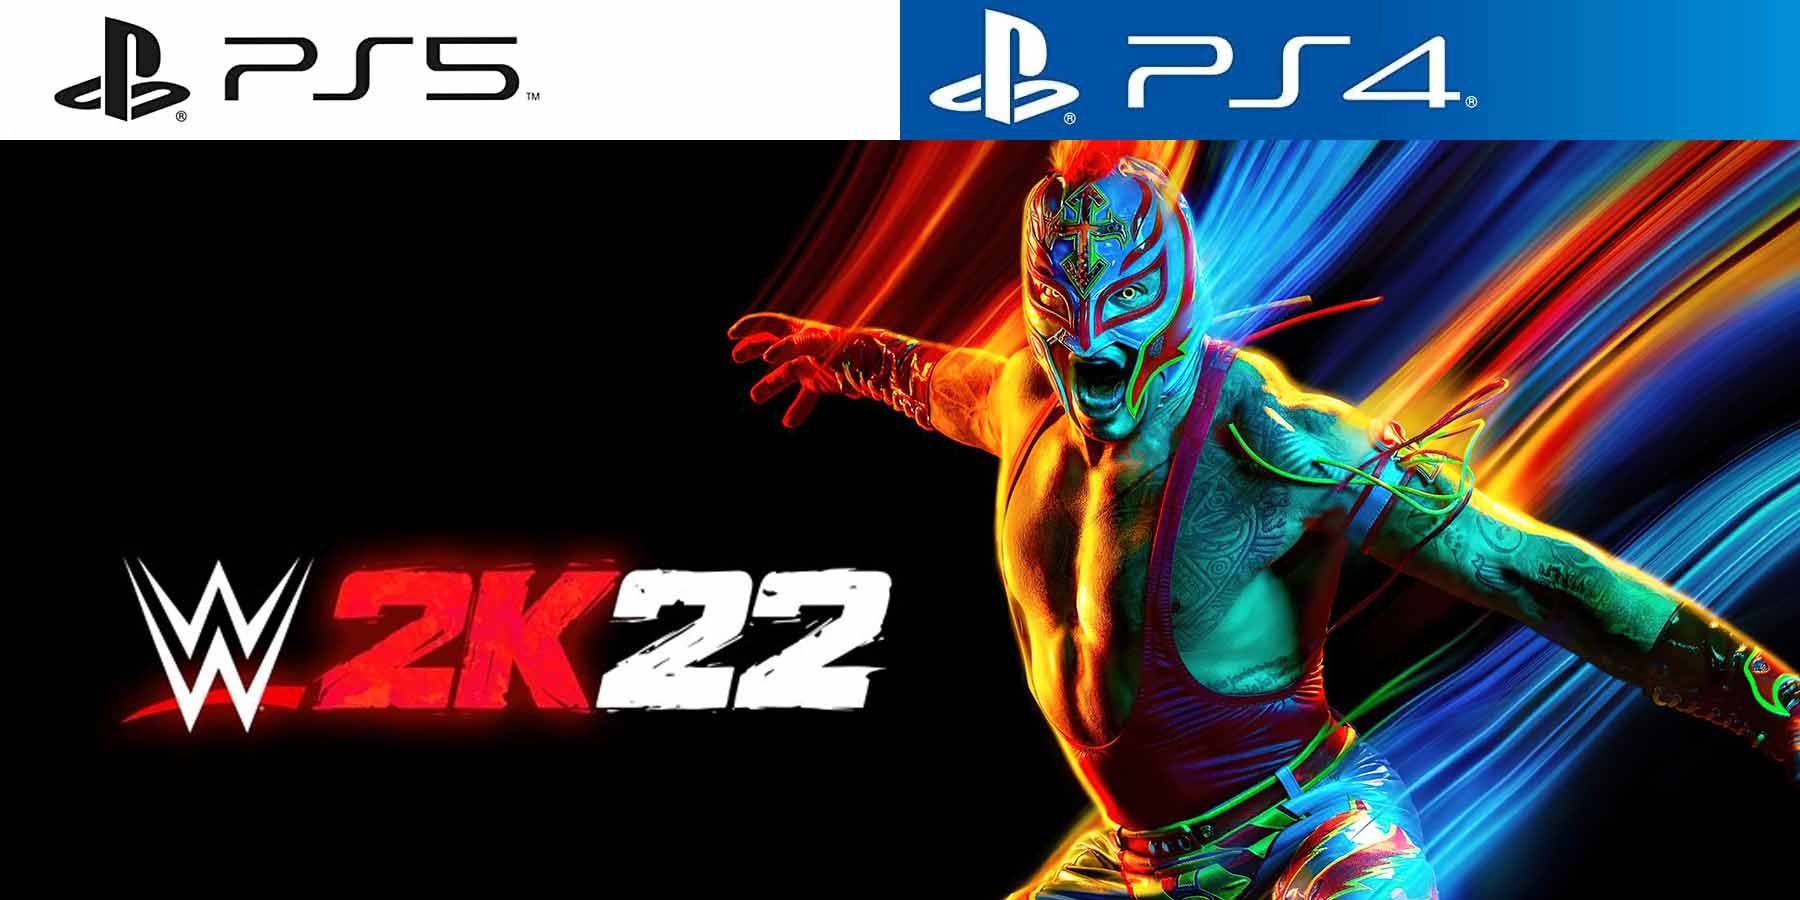 wwe-2k22-ps5-ps4-gamerant-holiday-gift-guide-amazon-products